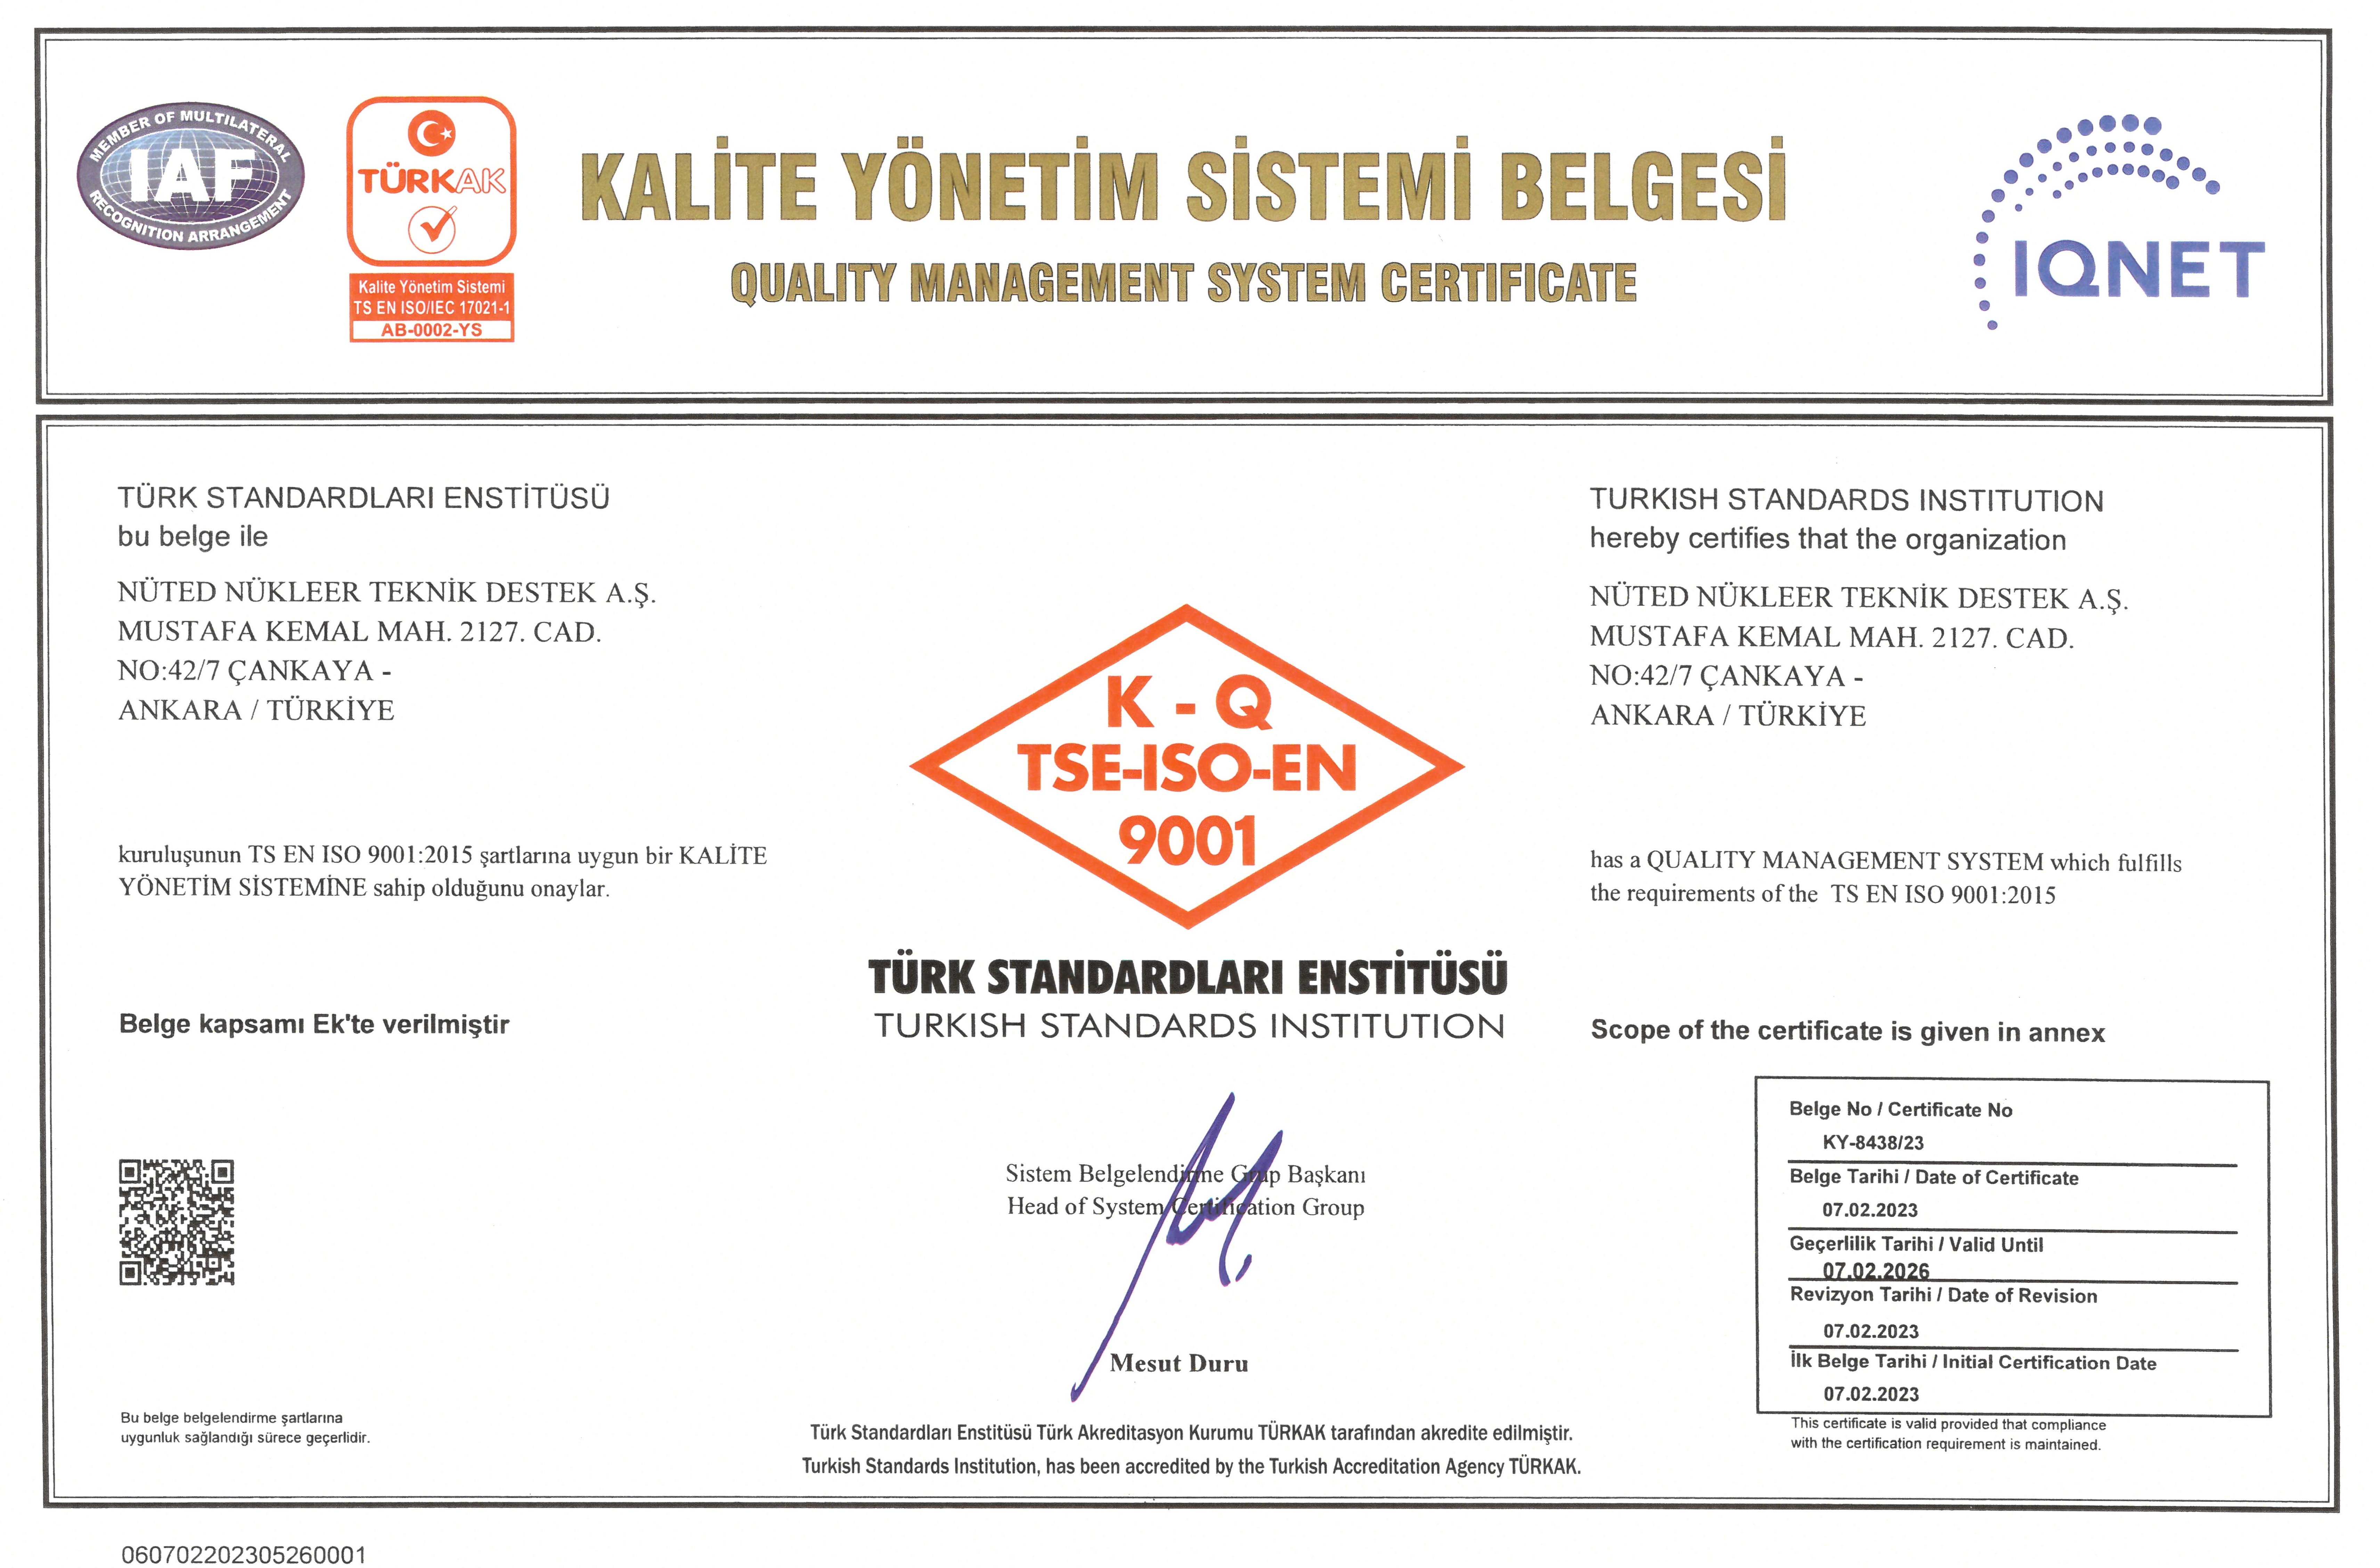 Our organization is certified according to TS EN ISO 9001:2015 standard.